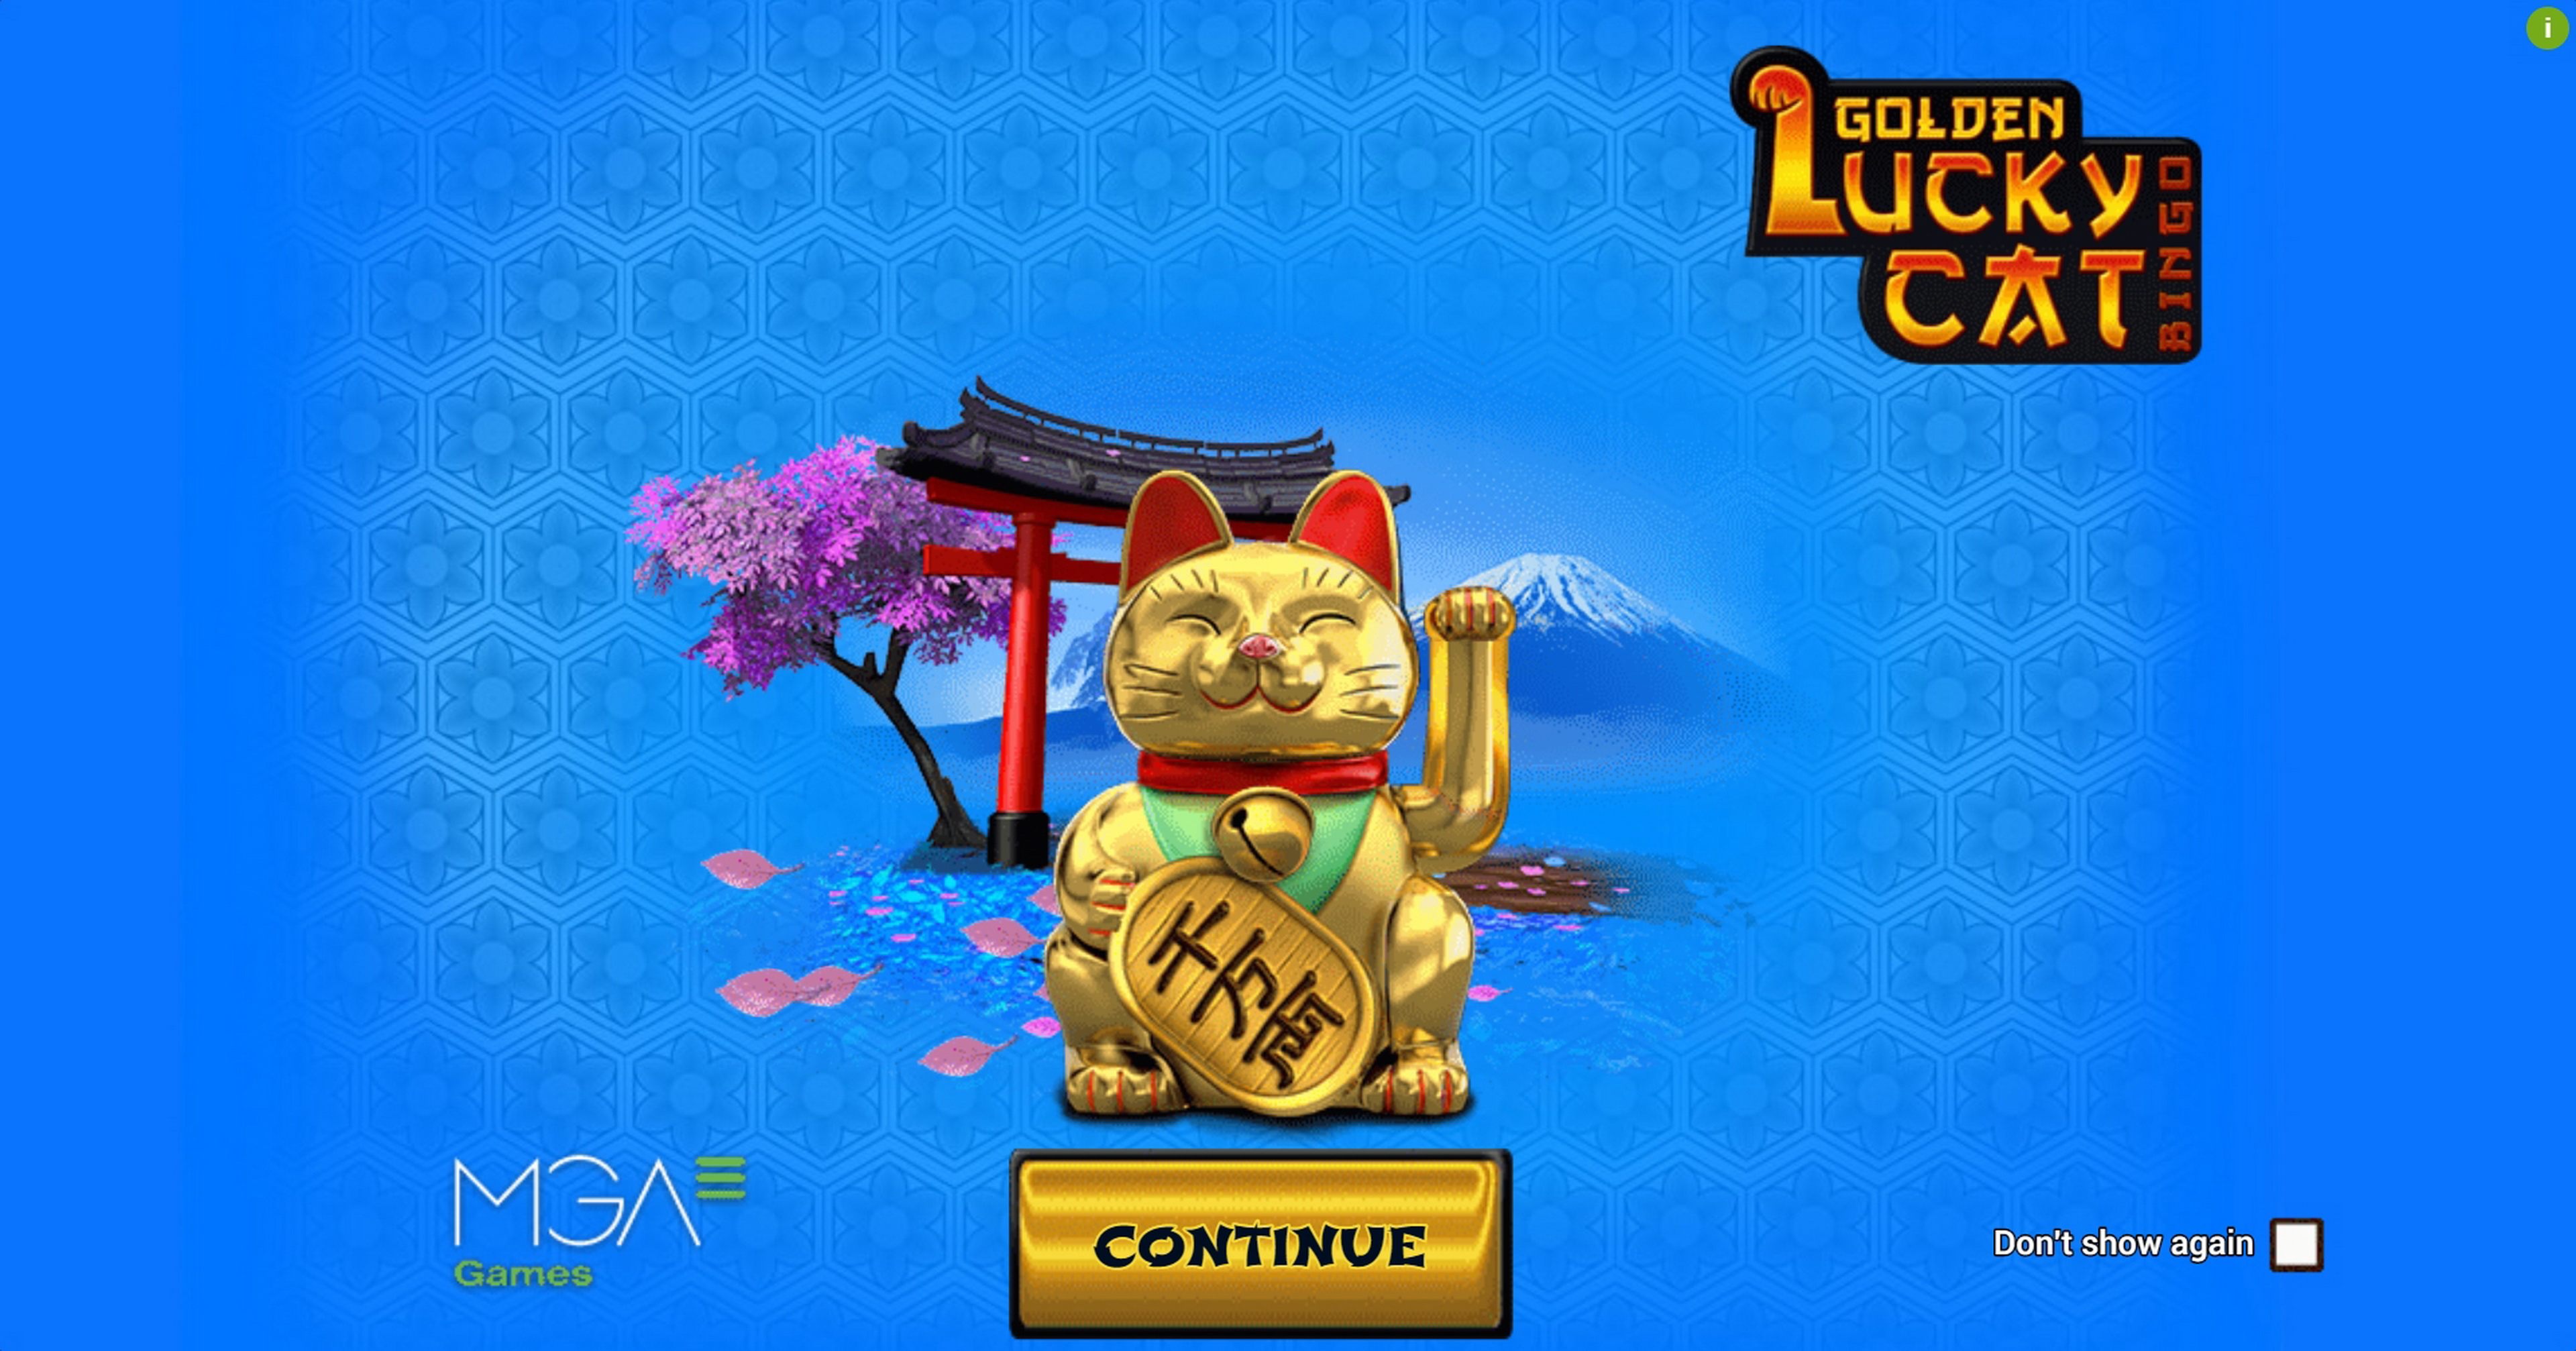 Play Golden Lucky Cat Bingo Free Casino Slot Game by MGA